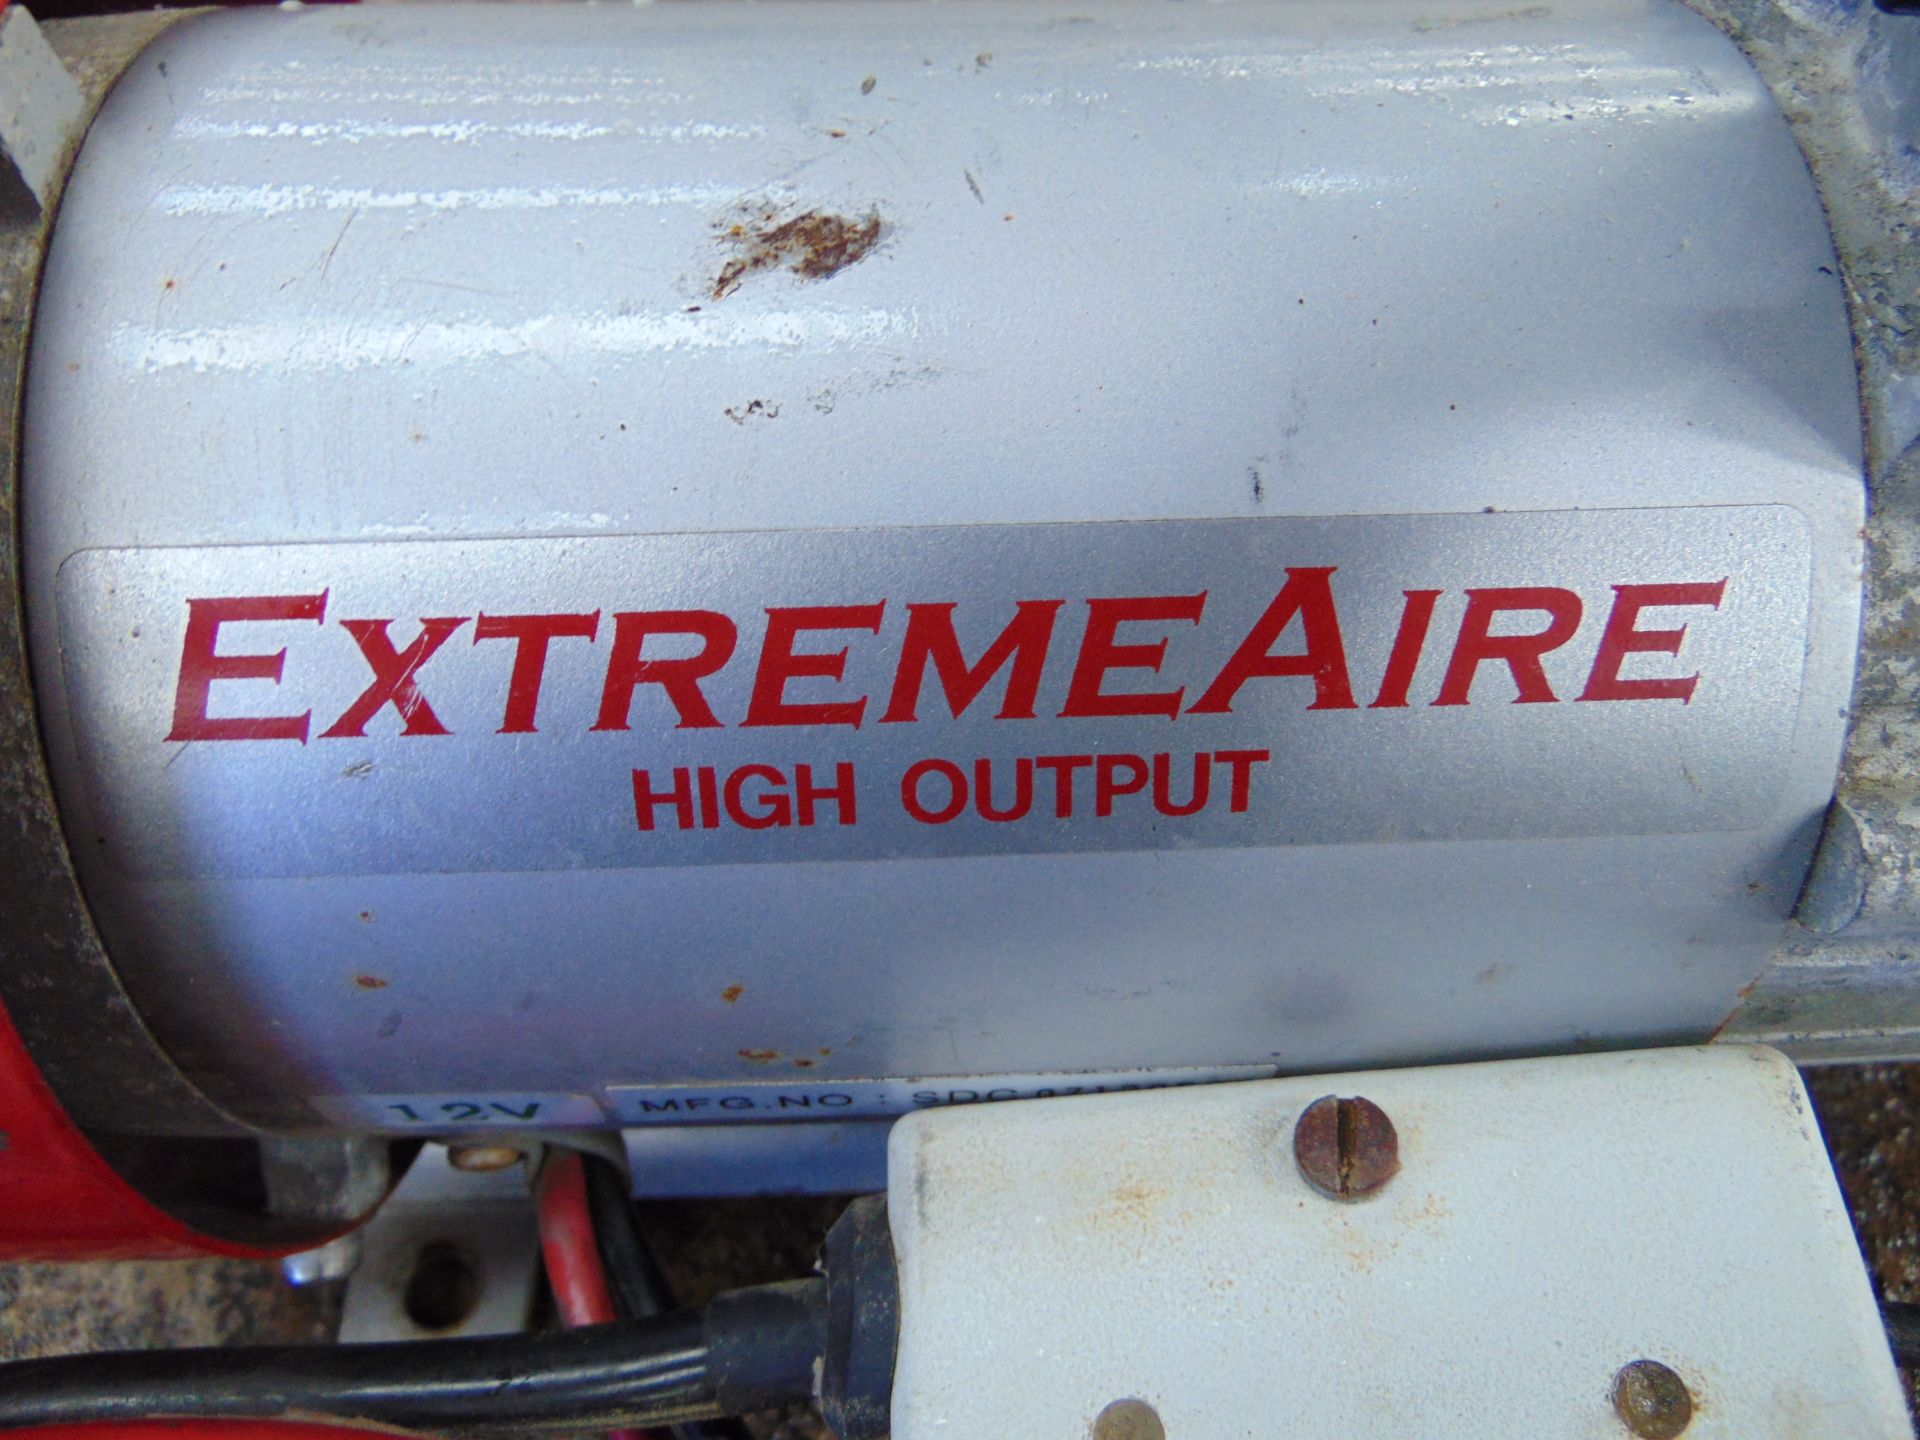 Extremeaire 12V Air Compressor - Image 4 of 6